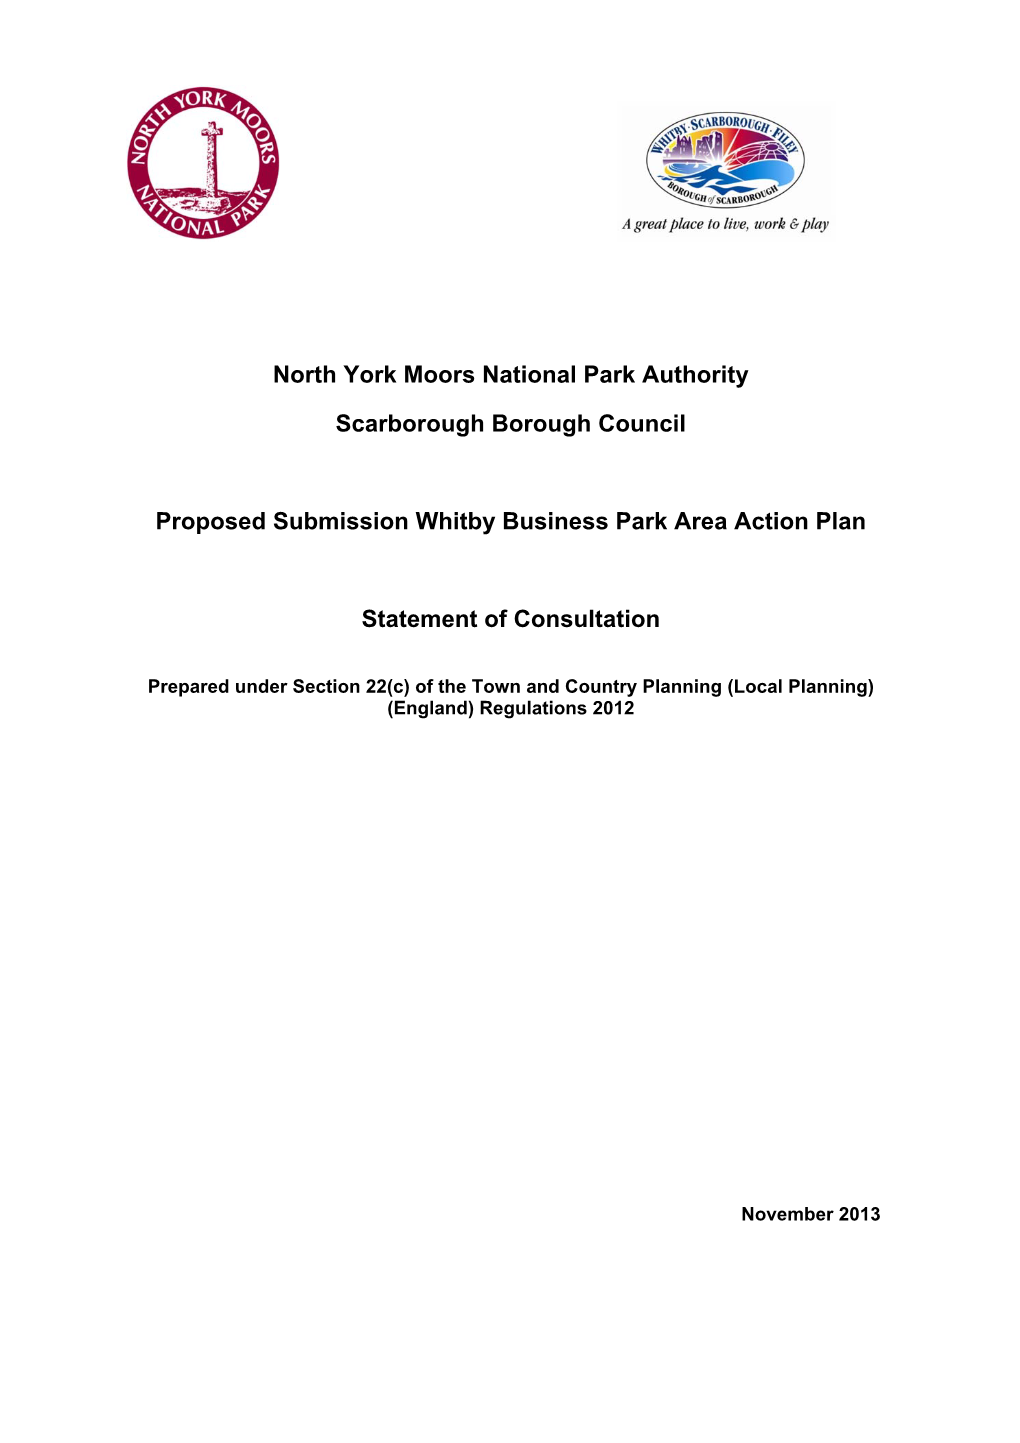 North York Moors National Park Authority Scarborough Borough Council Proposed Submission Whitby Business Park Area Action Plan S